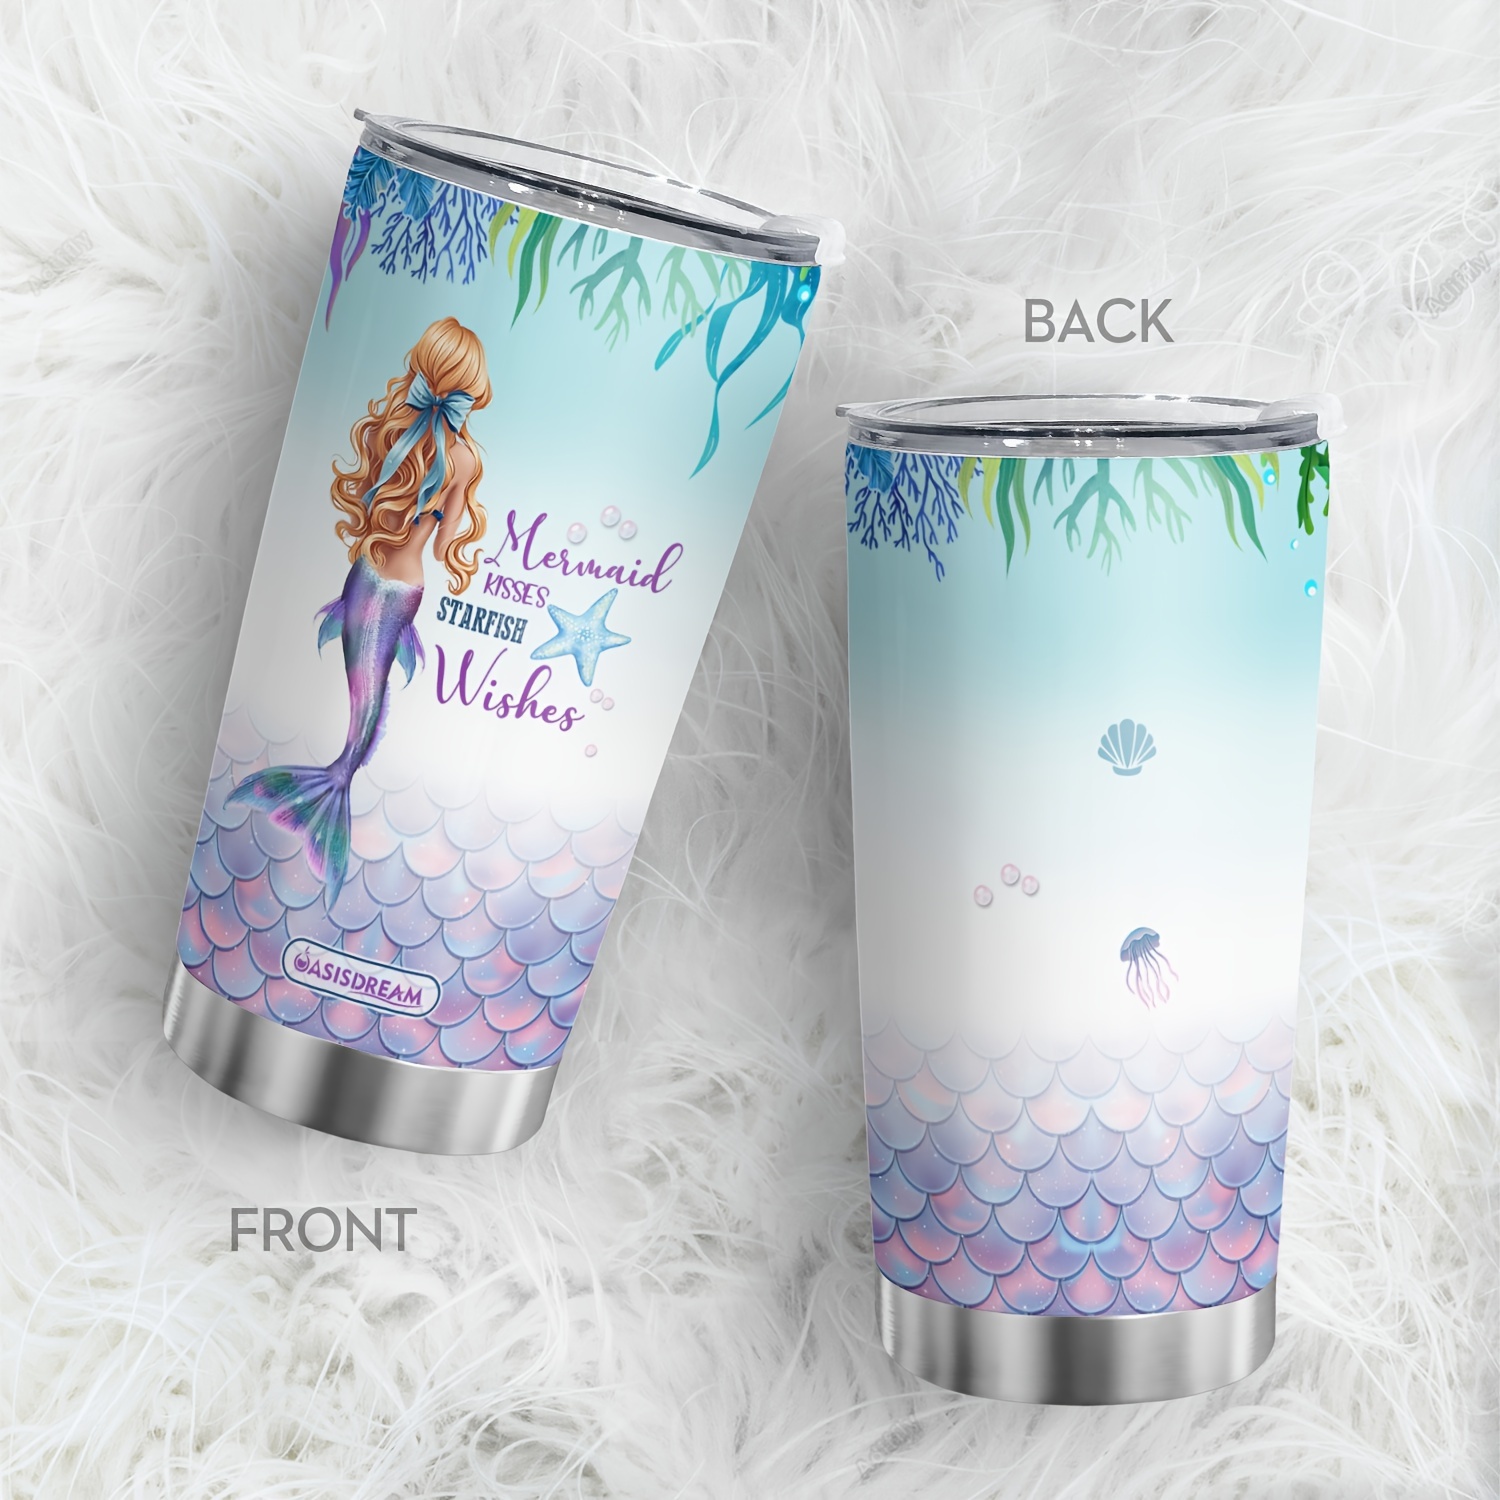 

1pc 20oz Birthday Gifts For Women Mermaid Kisses Starfish Design Tumbler Cup With Lid, Insulated Travel Coffee Mug, For Ice Drink, Hot Beverage